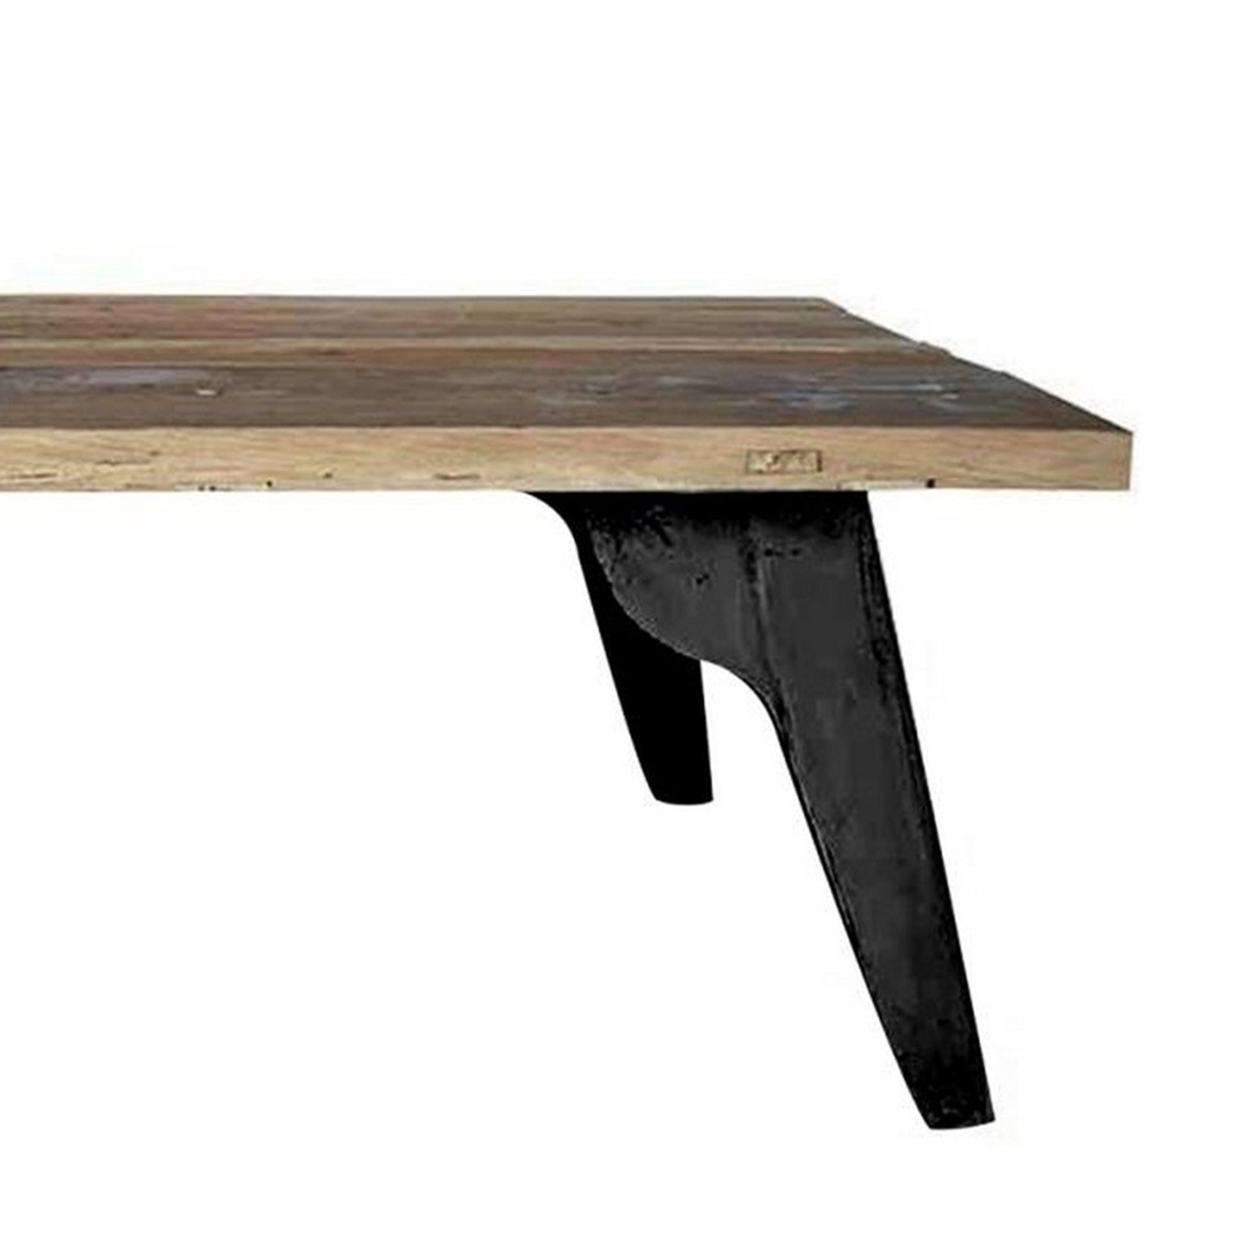 55 Inch Coffee Table, Smooth Wood Surface, Rubbed Edges, Flared Black Legs- Saltoro Sherpi